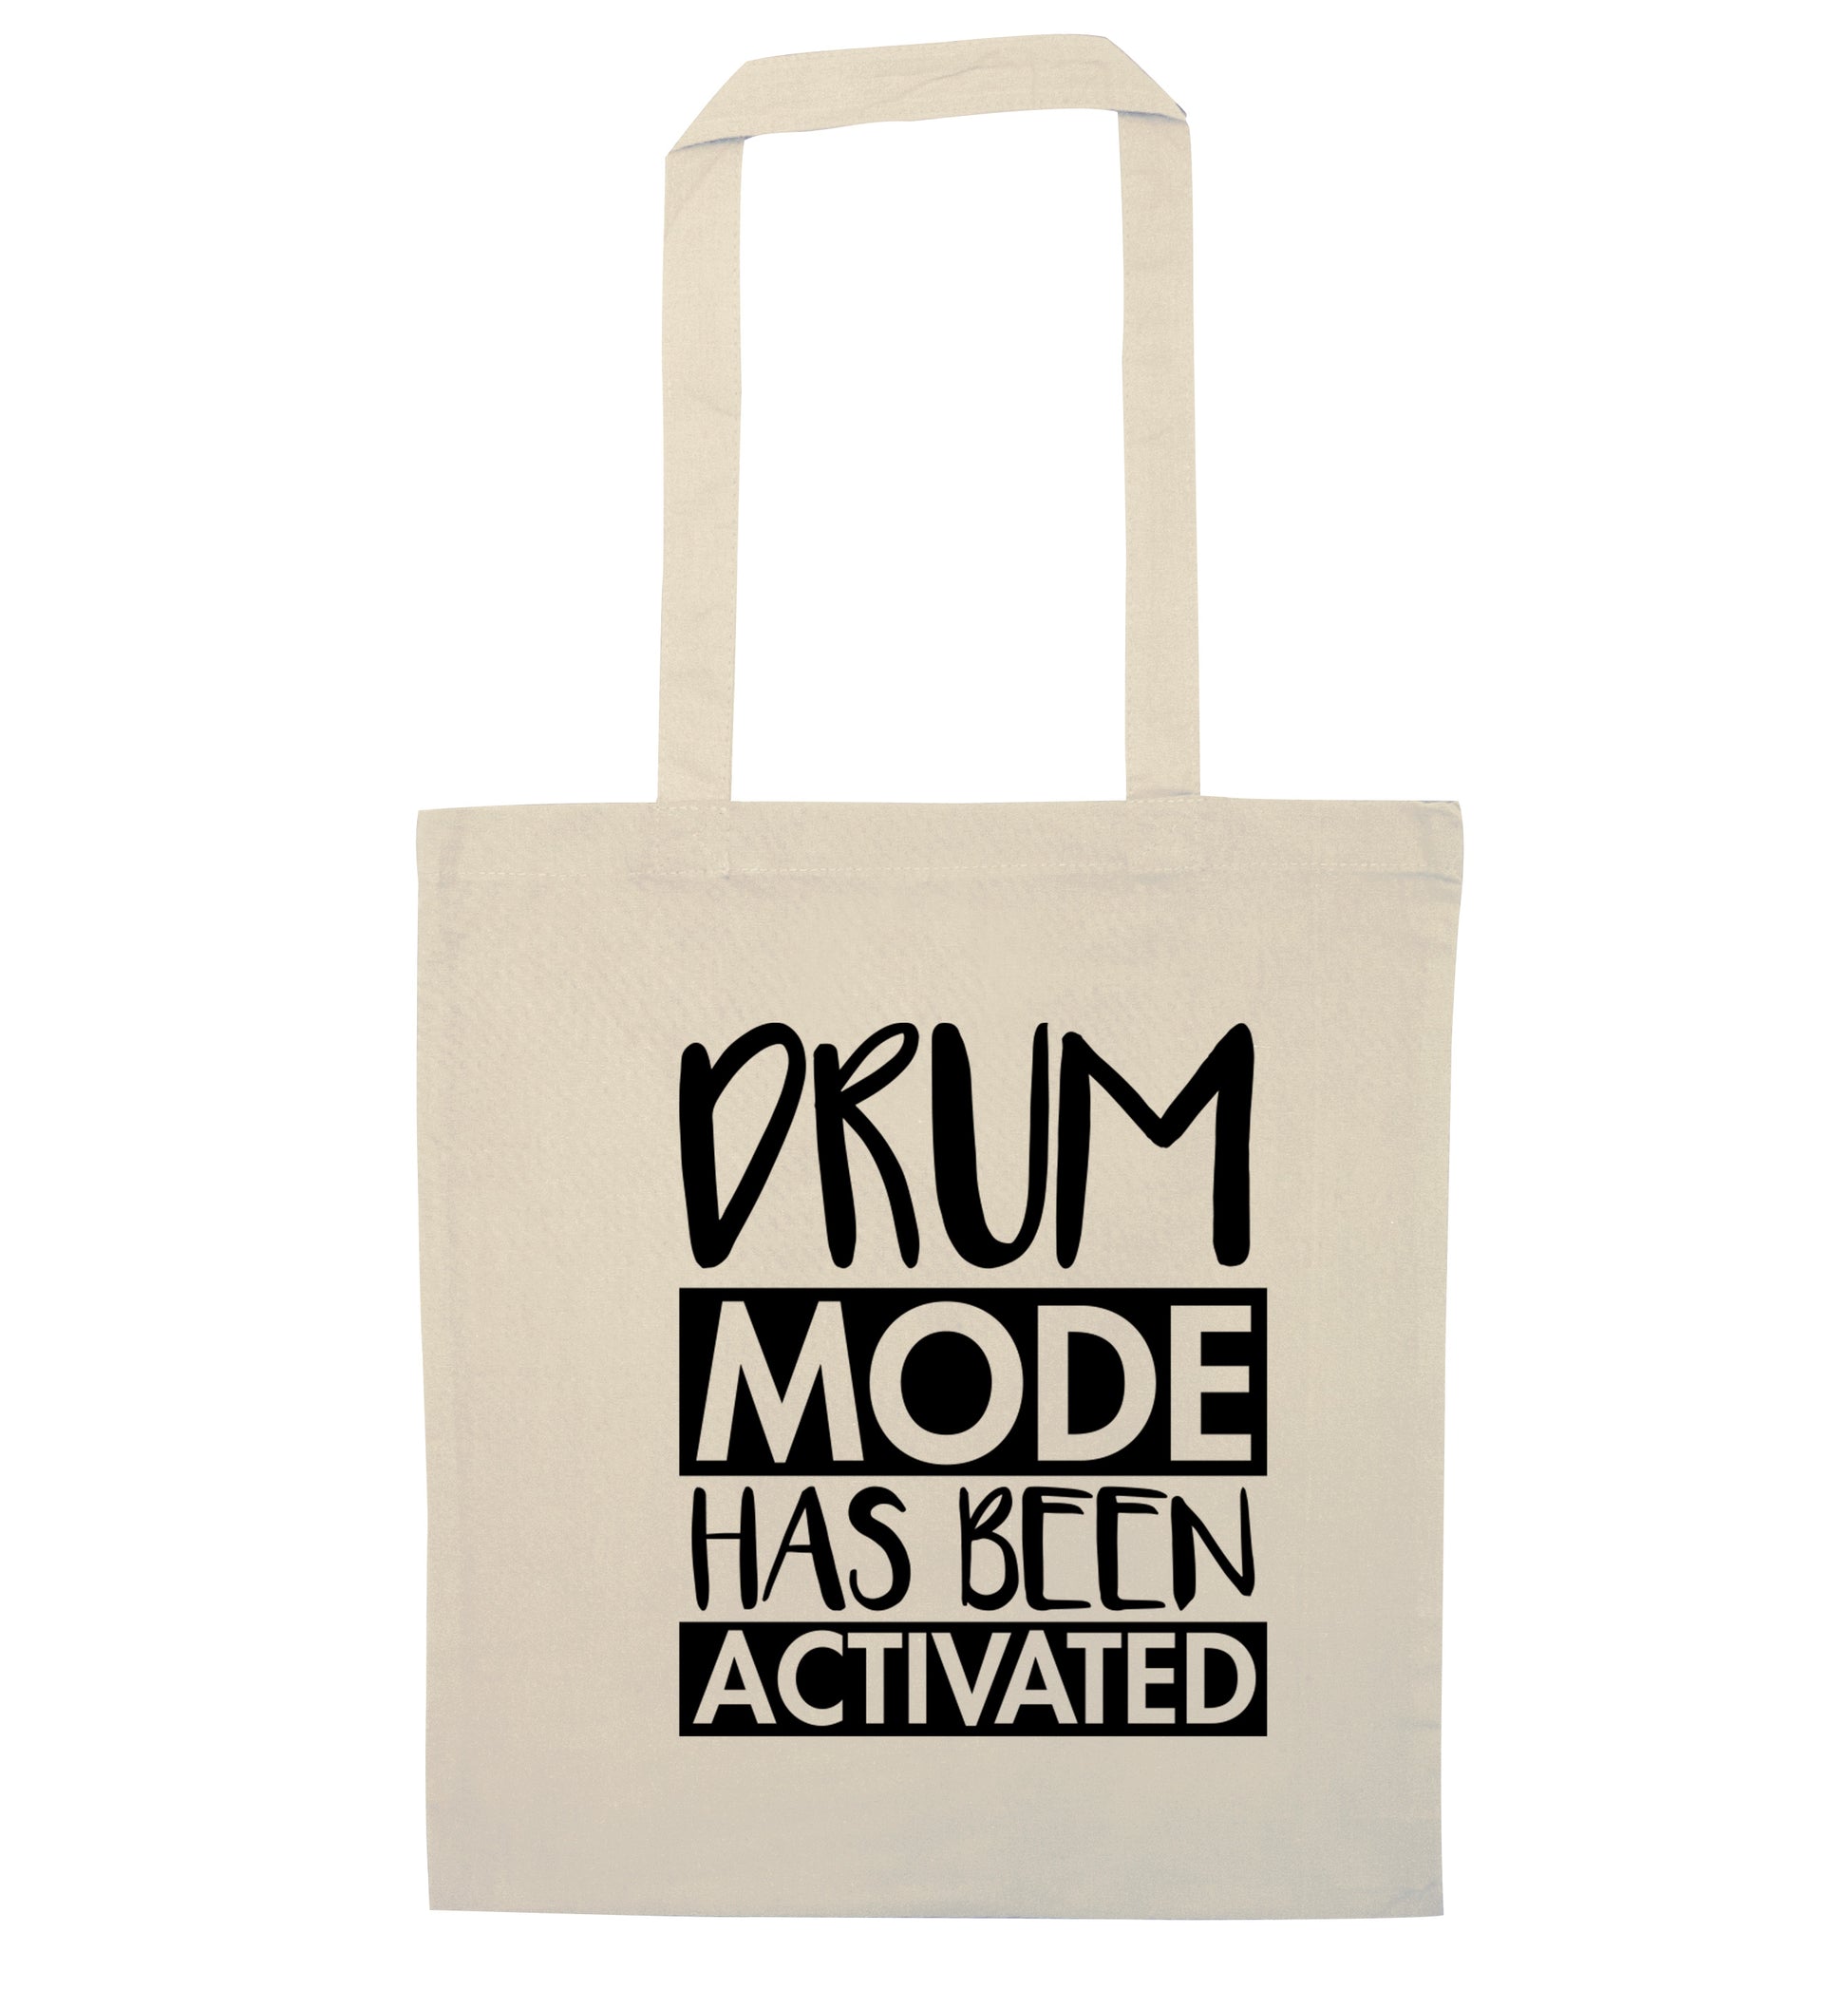 Drum mode activated natural tote bag